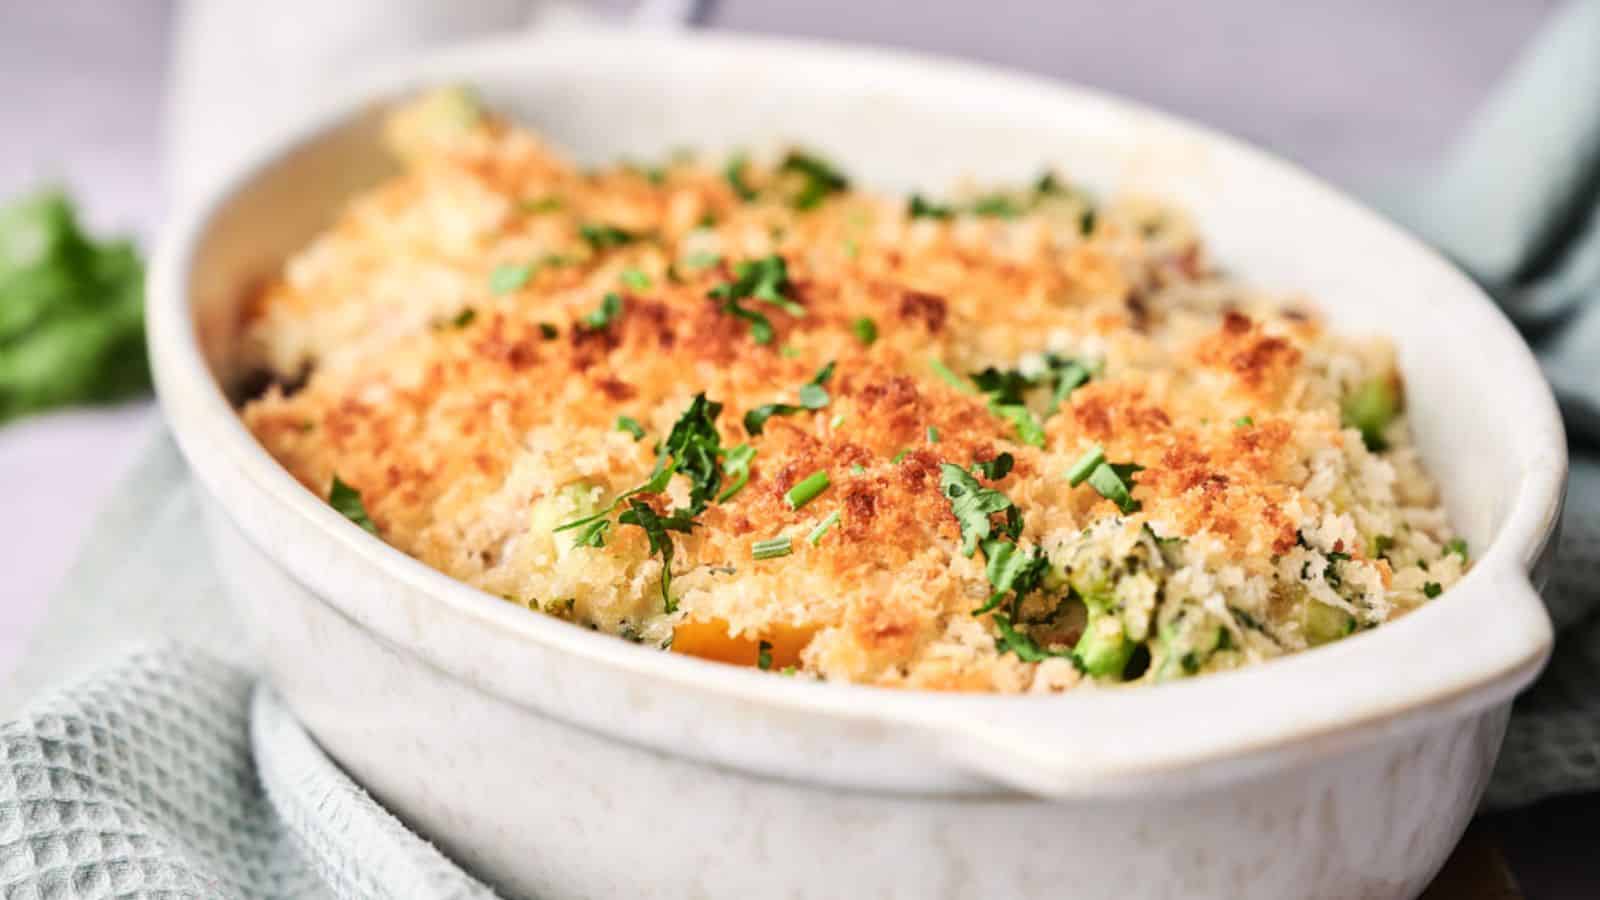 <p>Celebrate Easter with our Vegetable Casserole, a delightful dish bursting with vibrant flavors. Whether as a hearty side or a standalone meal, this casserole is a versatile addition to your Easter table that’s sure to please everyone. Get ready to indulge in a wholesome feast that’s as good for you as it is delicious!<br><strong>Get the Recipe: </strong><a href="https://twocityvegans.com/vegetable-casserole/?utm_source=msn&utm_medium=page&utm_campaign=msn">Vegetable Casserole</a></p>